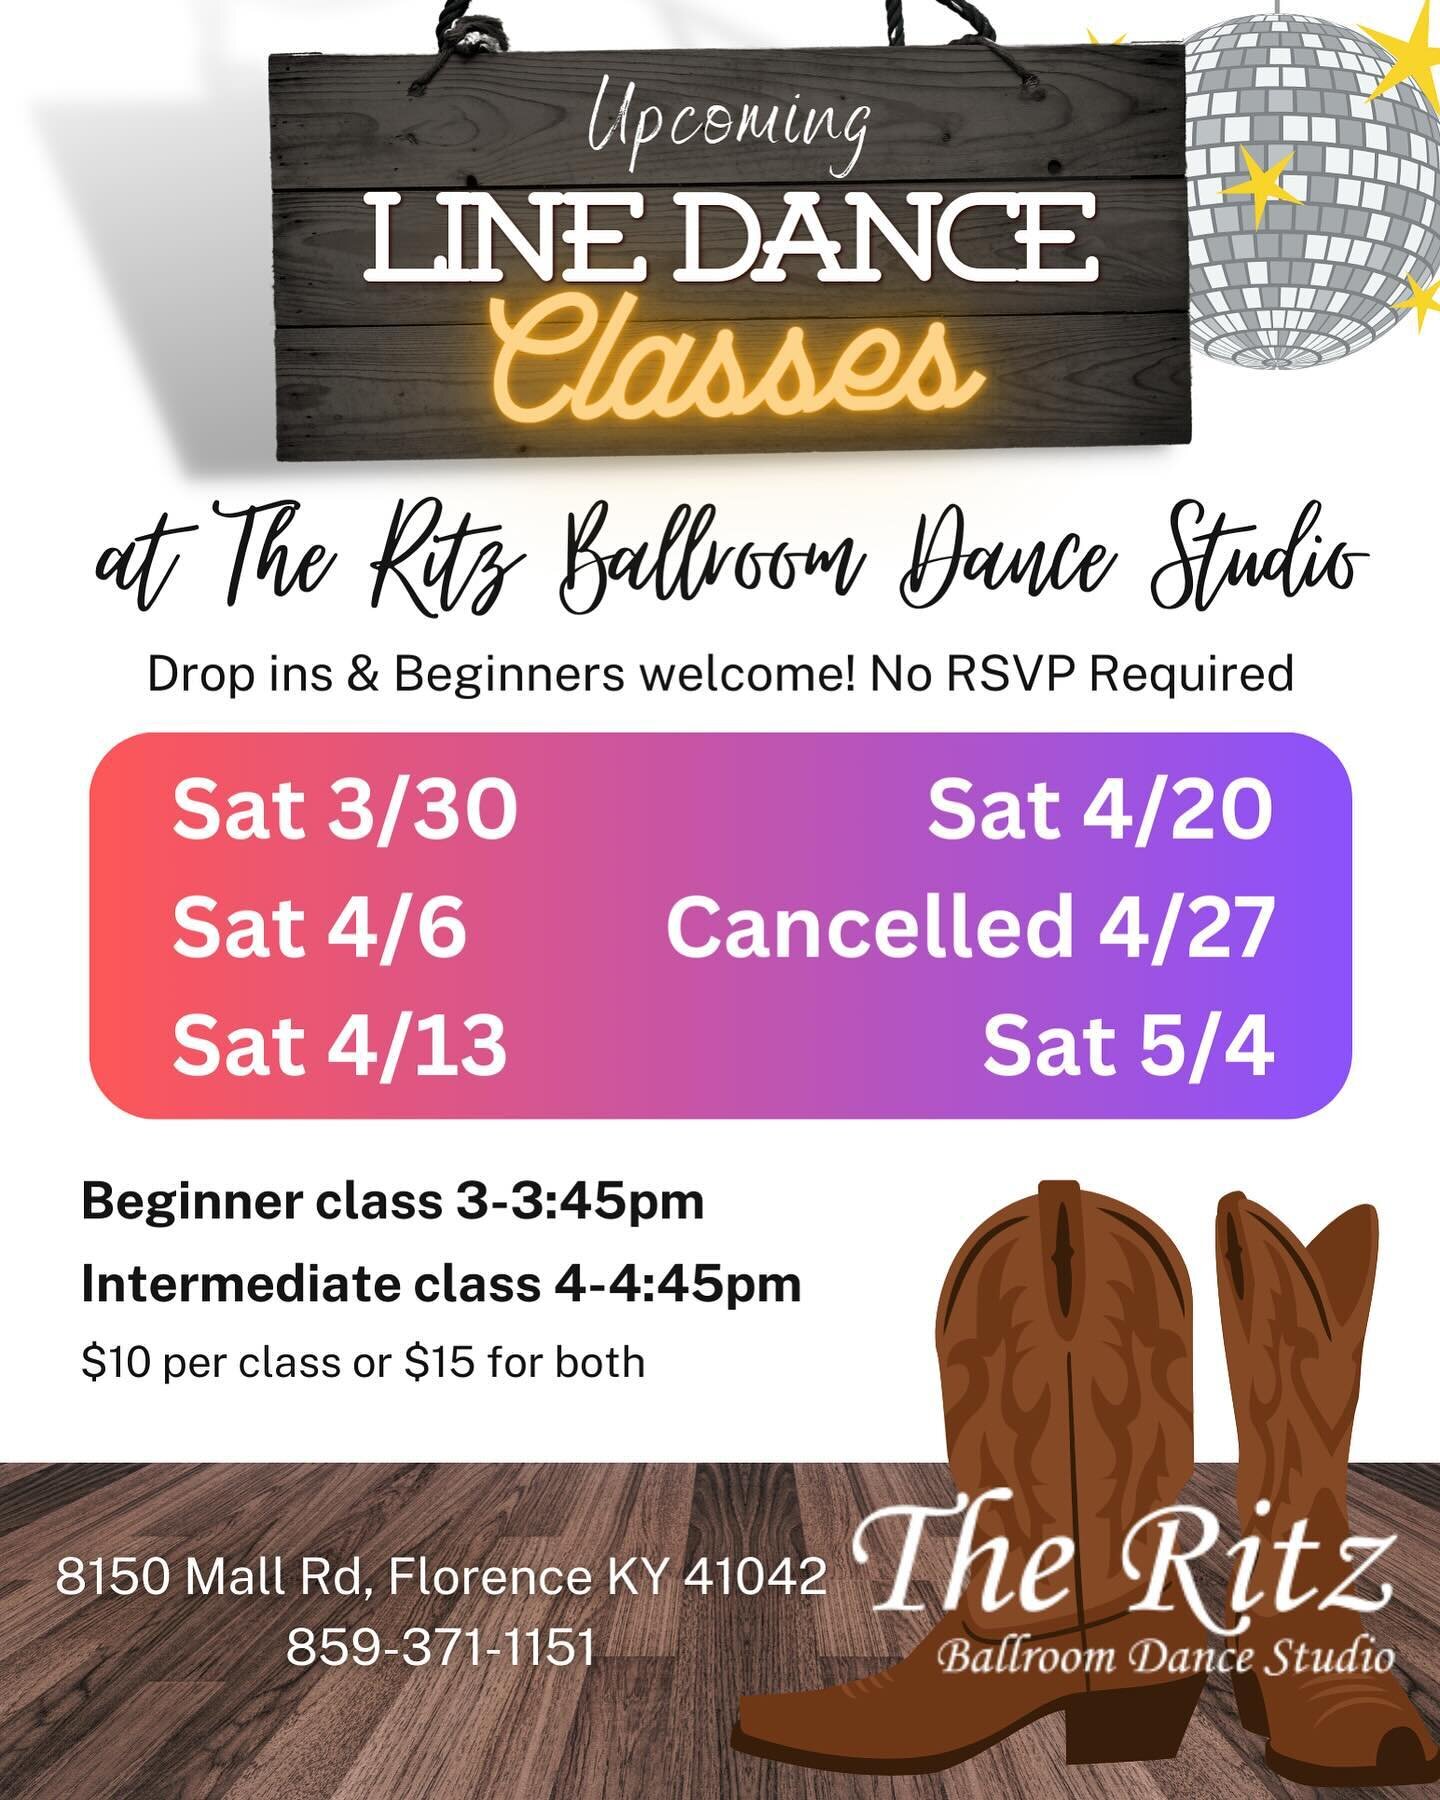 Don&rsquo;t forget Line Dancing this weekend! 💃🏼✨ Beginner is at 3 and intermediate at 4! Drop ins and beginners welcome. This is the upcoming schedule for end of March, April, and first weekend of May. Please note there will be no class on Saturda